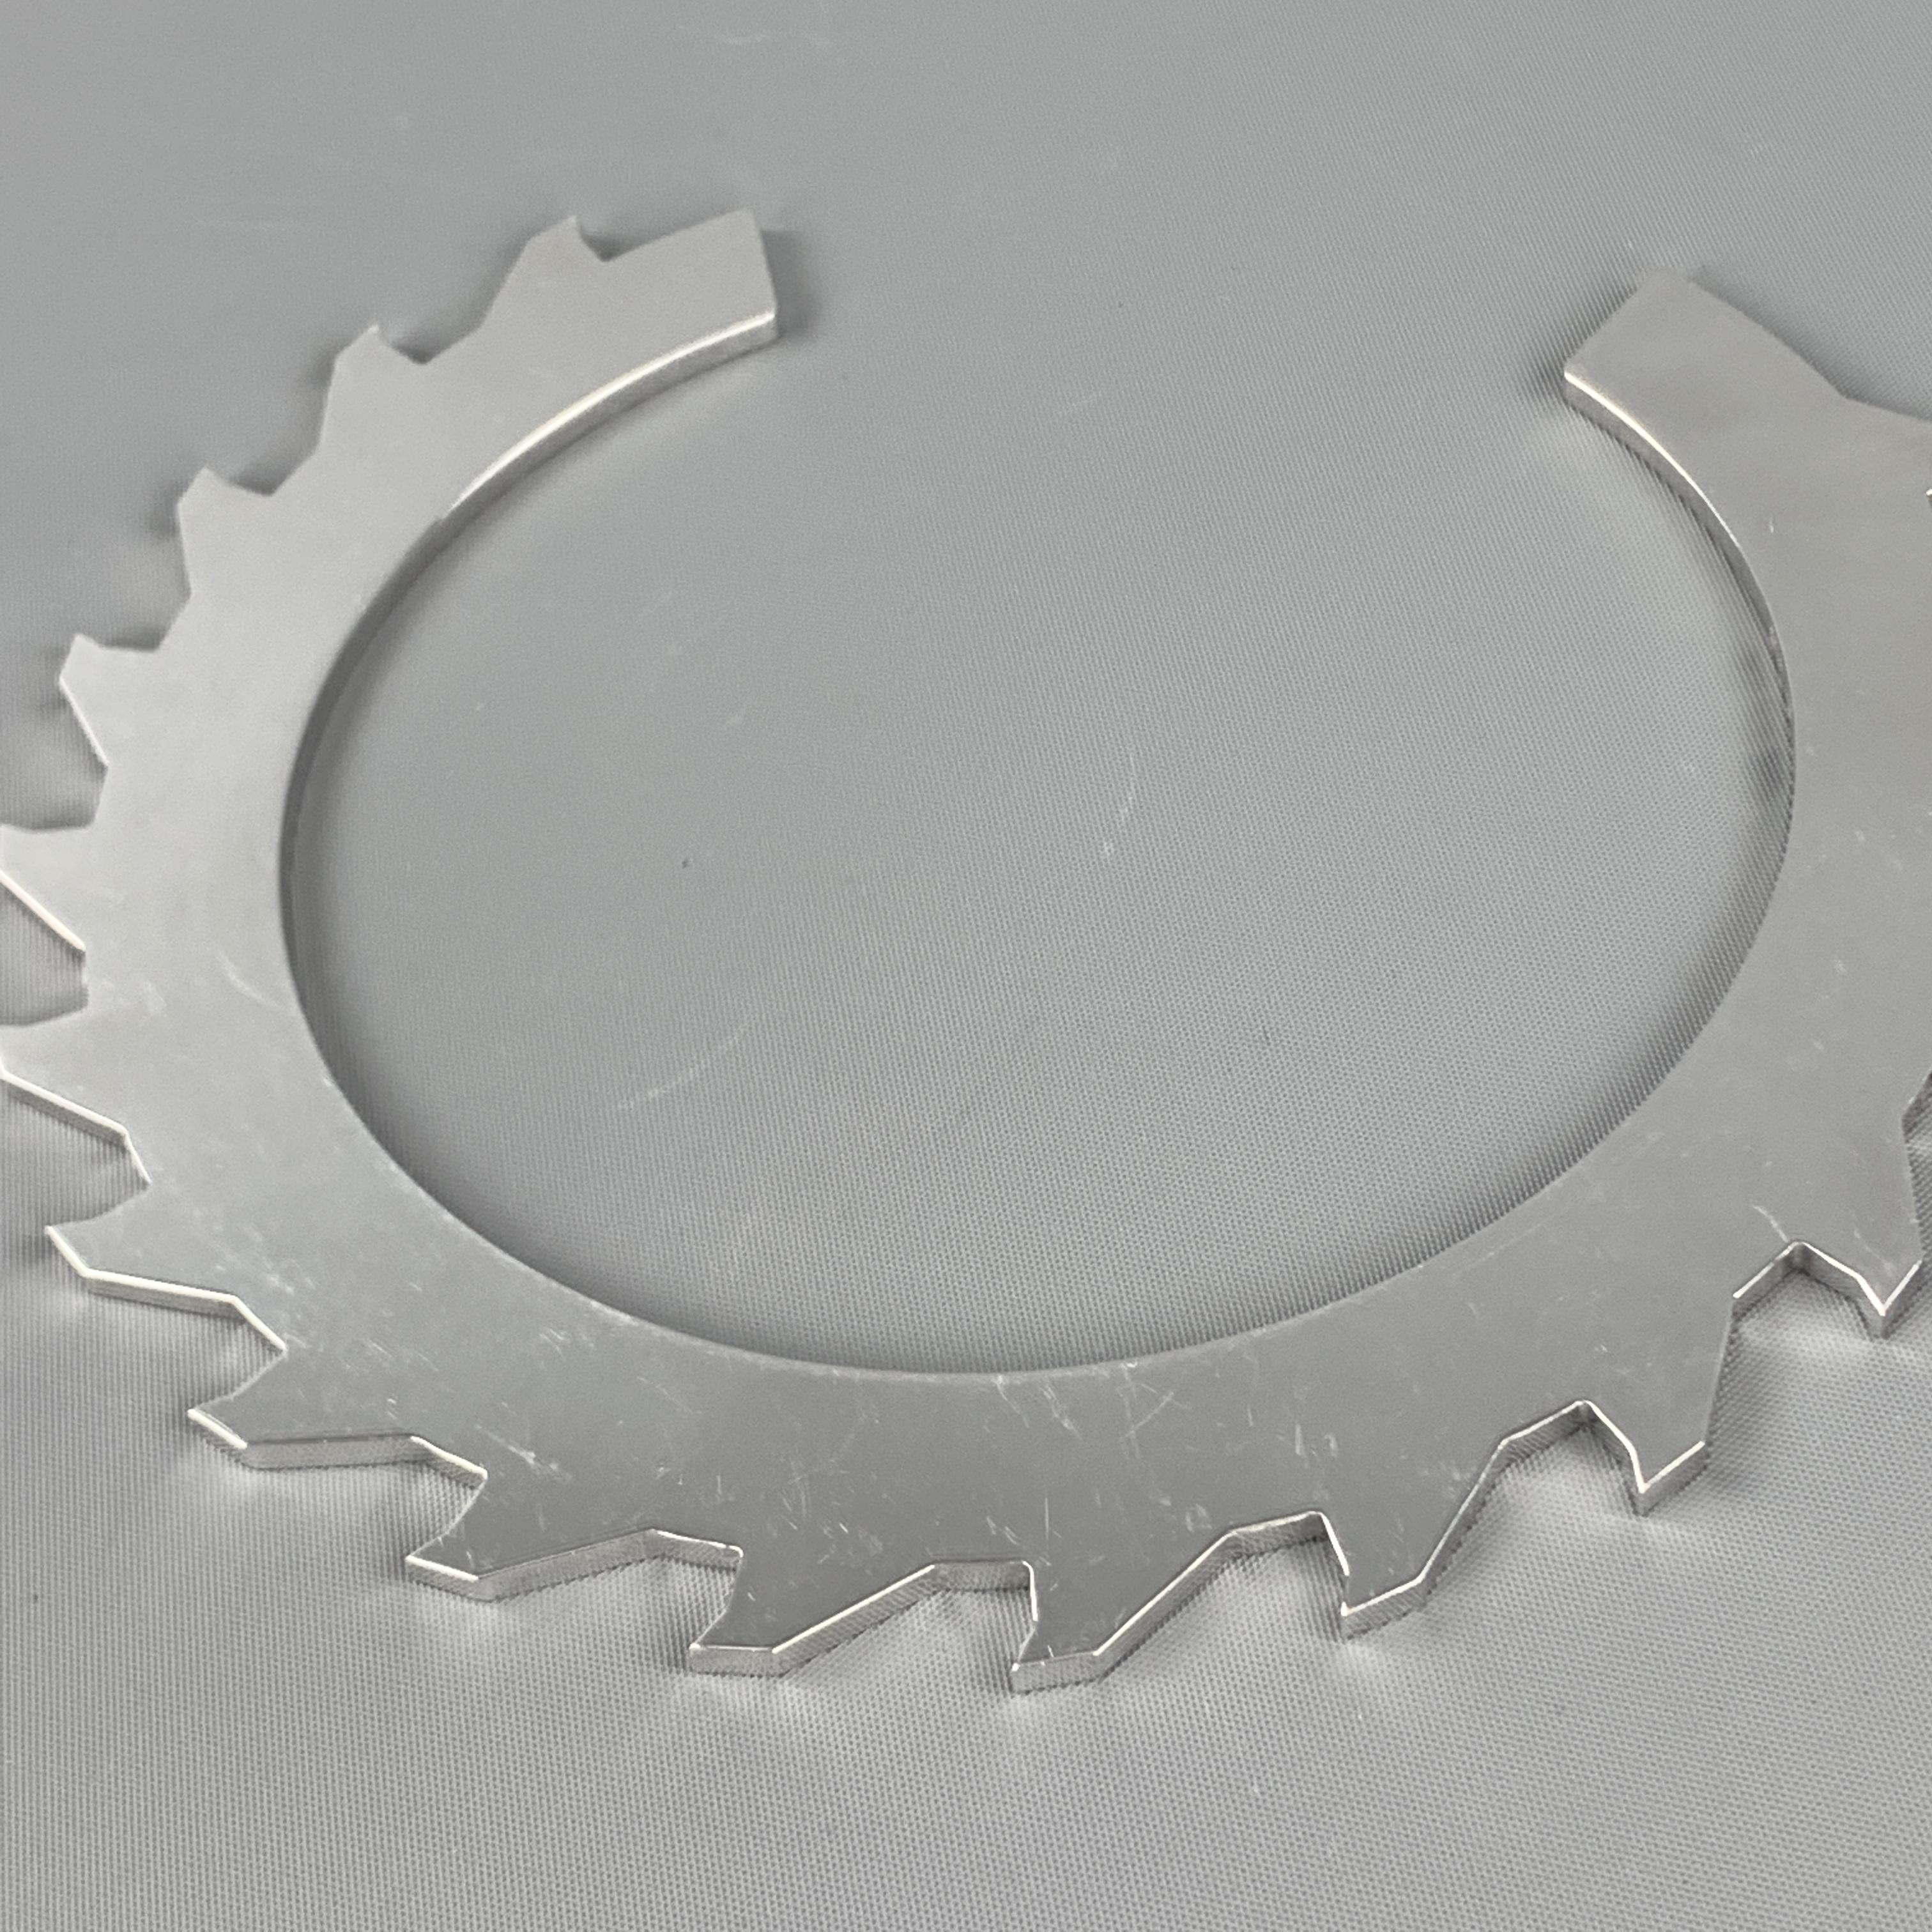 BOND HARDWARE NYC Buzzsaw Choker size Medium comes in silver tone aluminum in a flat metal shape. Wear throughout. As-is.

Good Pre-Owned Condition.
Width: 1 in.
Fits: 15 in.